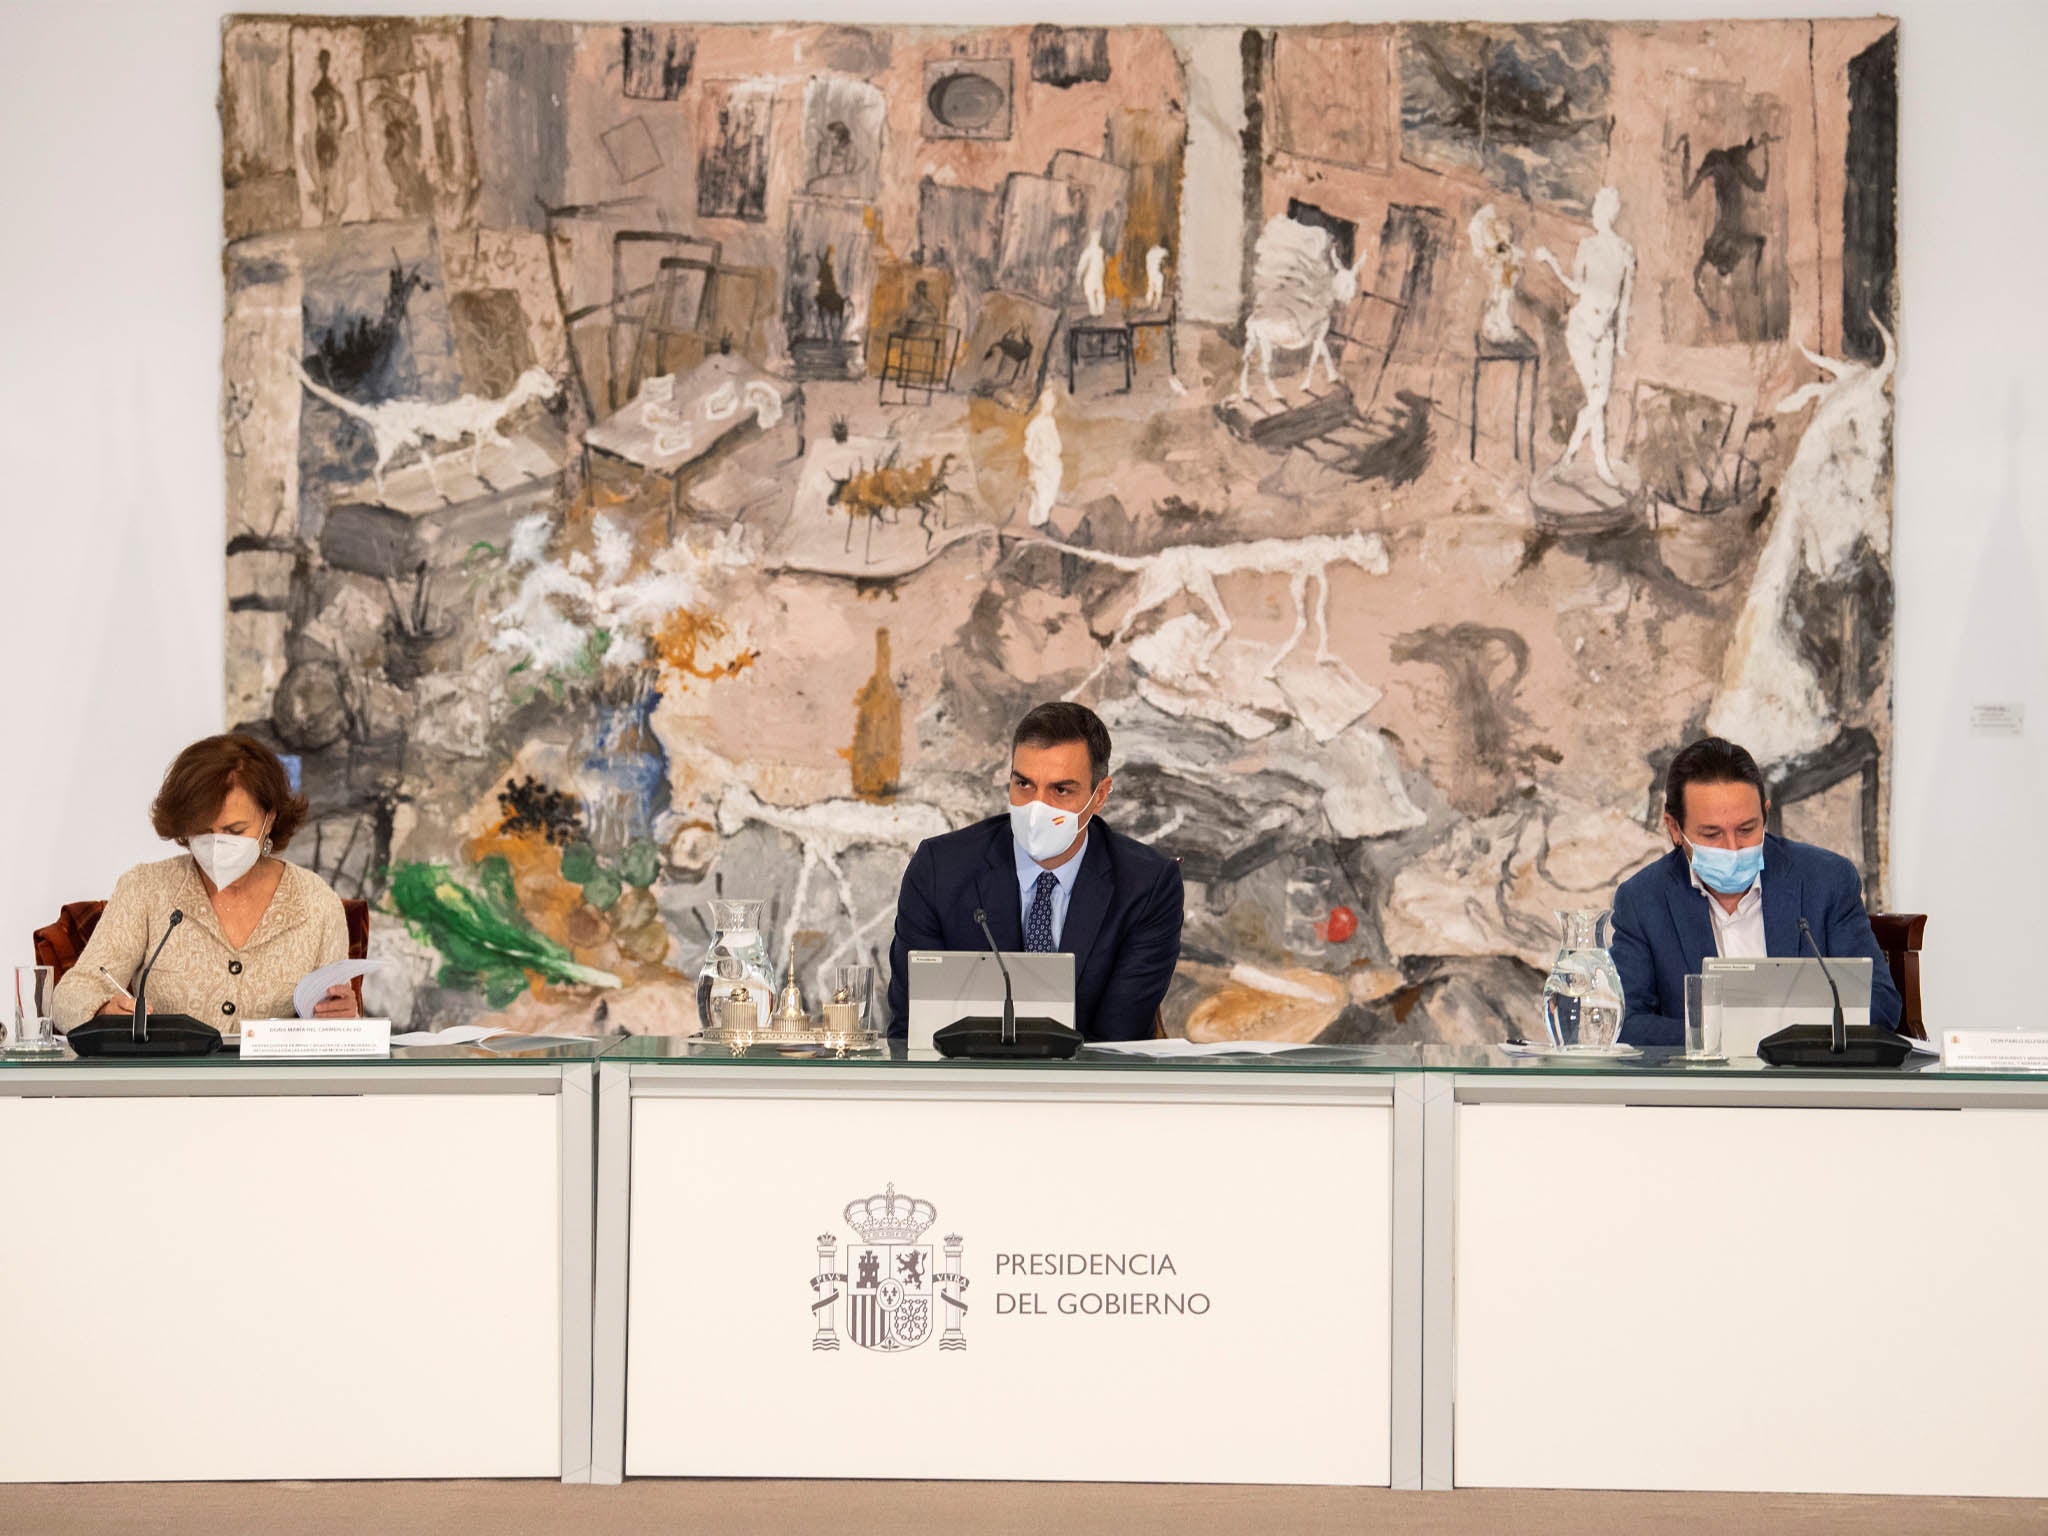 Pedro Sanchez chairs a cabinet meeting on 25 October to study the terms of a royal decree for the declaration of a new emergency state amid coronavirus outbreak